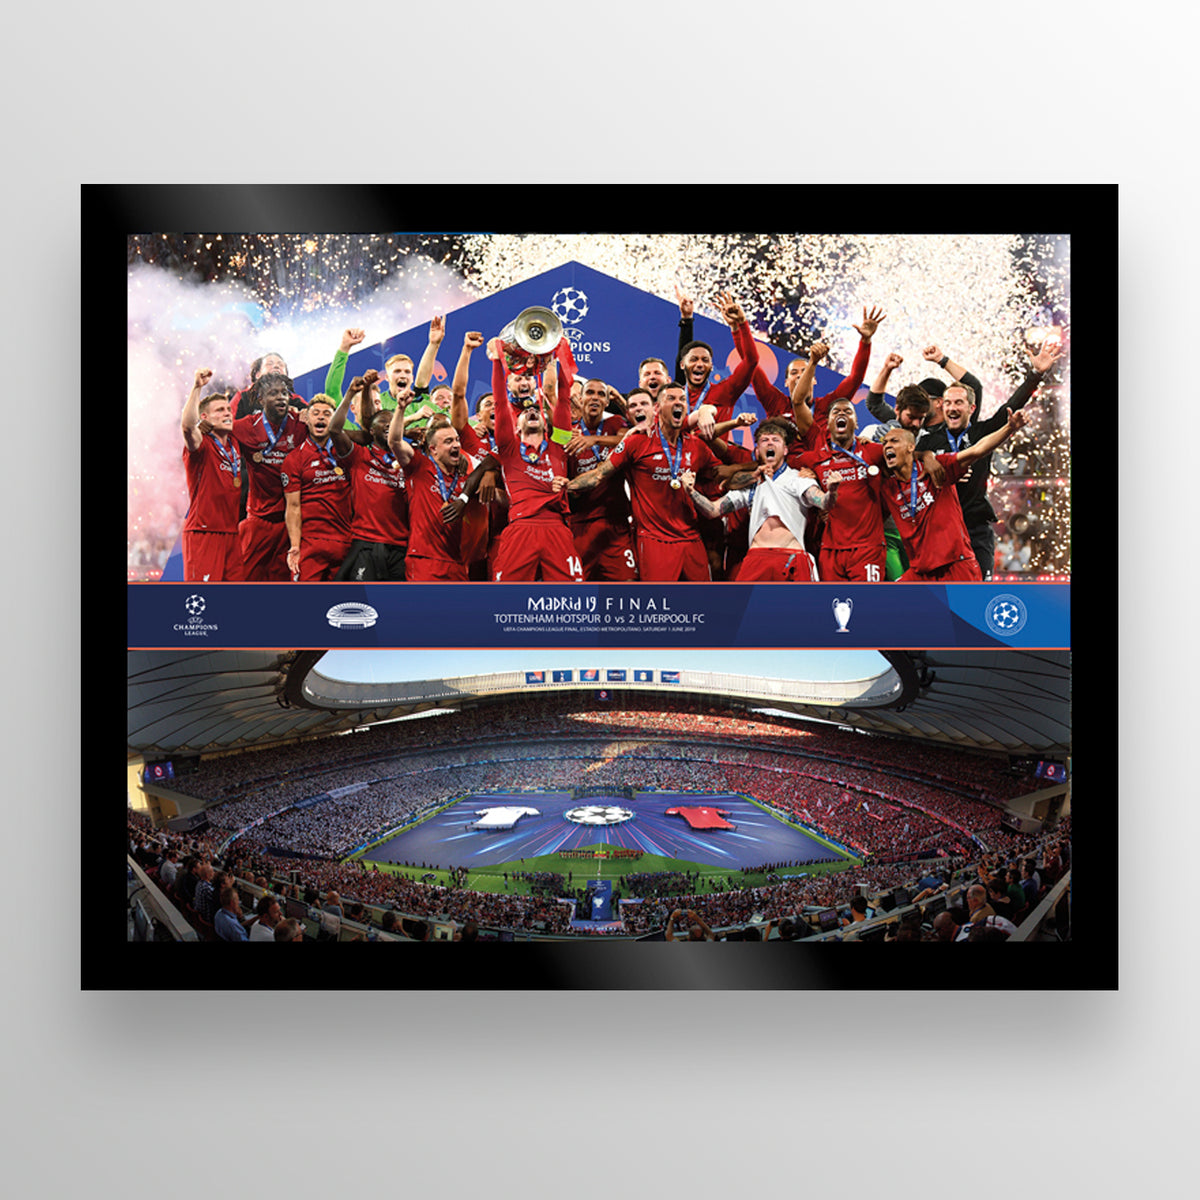 UEFA Champions League 2019 Final - Winner: Liverpool - Black Frame UEFA Club Competitions Online Store